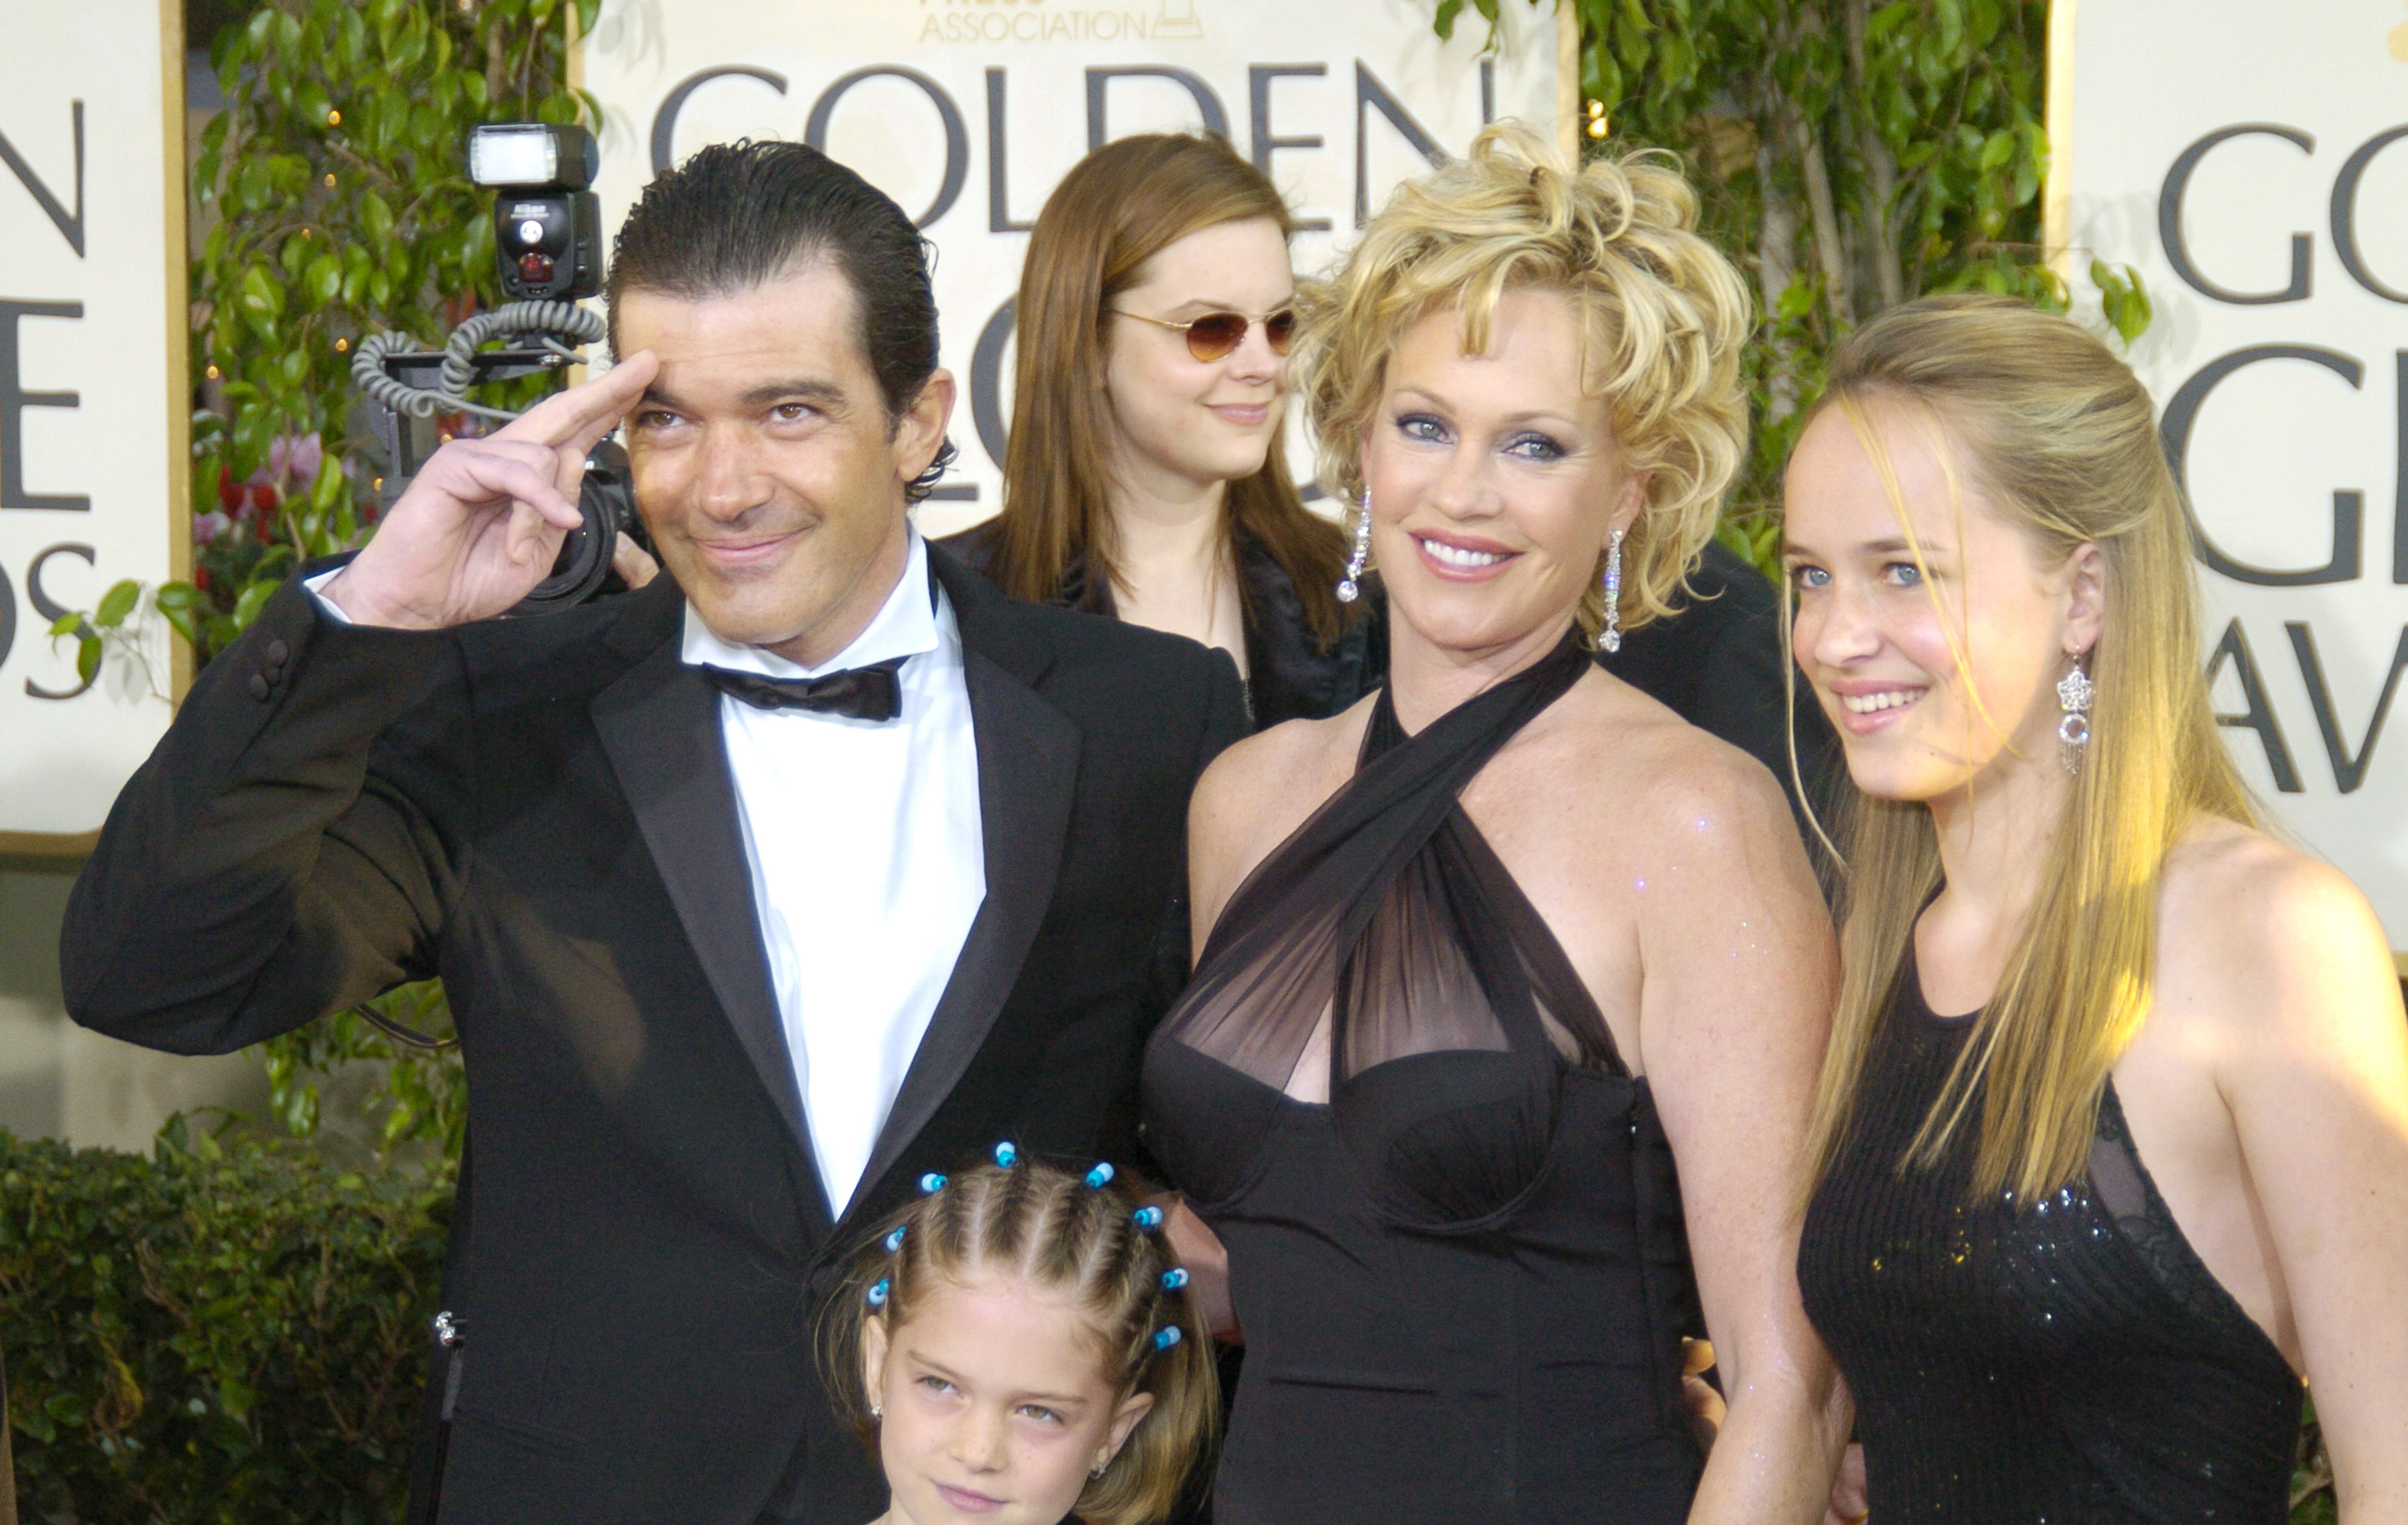 Antonio Banderas, Melanie Griffith and children during The 61st Annual Golden Globe Awards - Arrivals at The Beverly Hilton Hotel in Beverly Hills, California